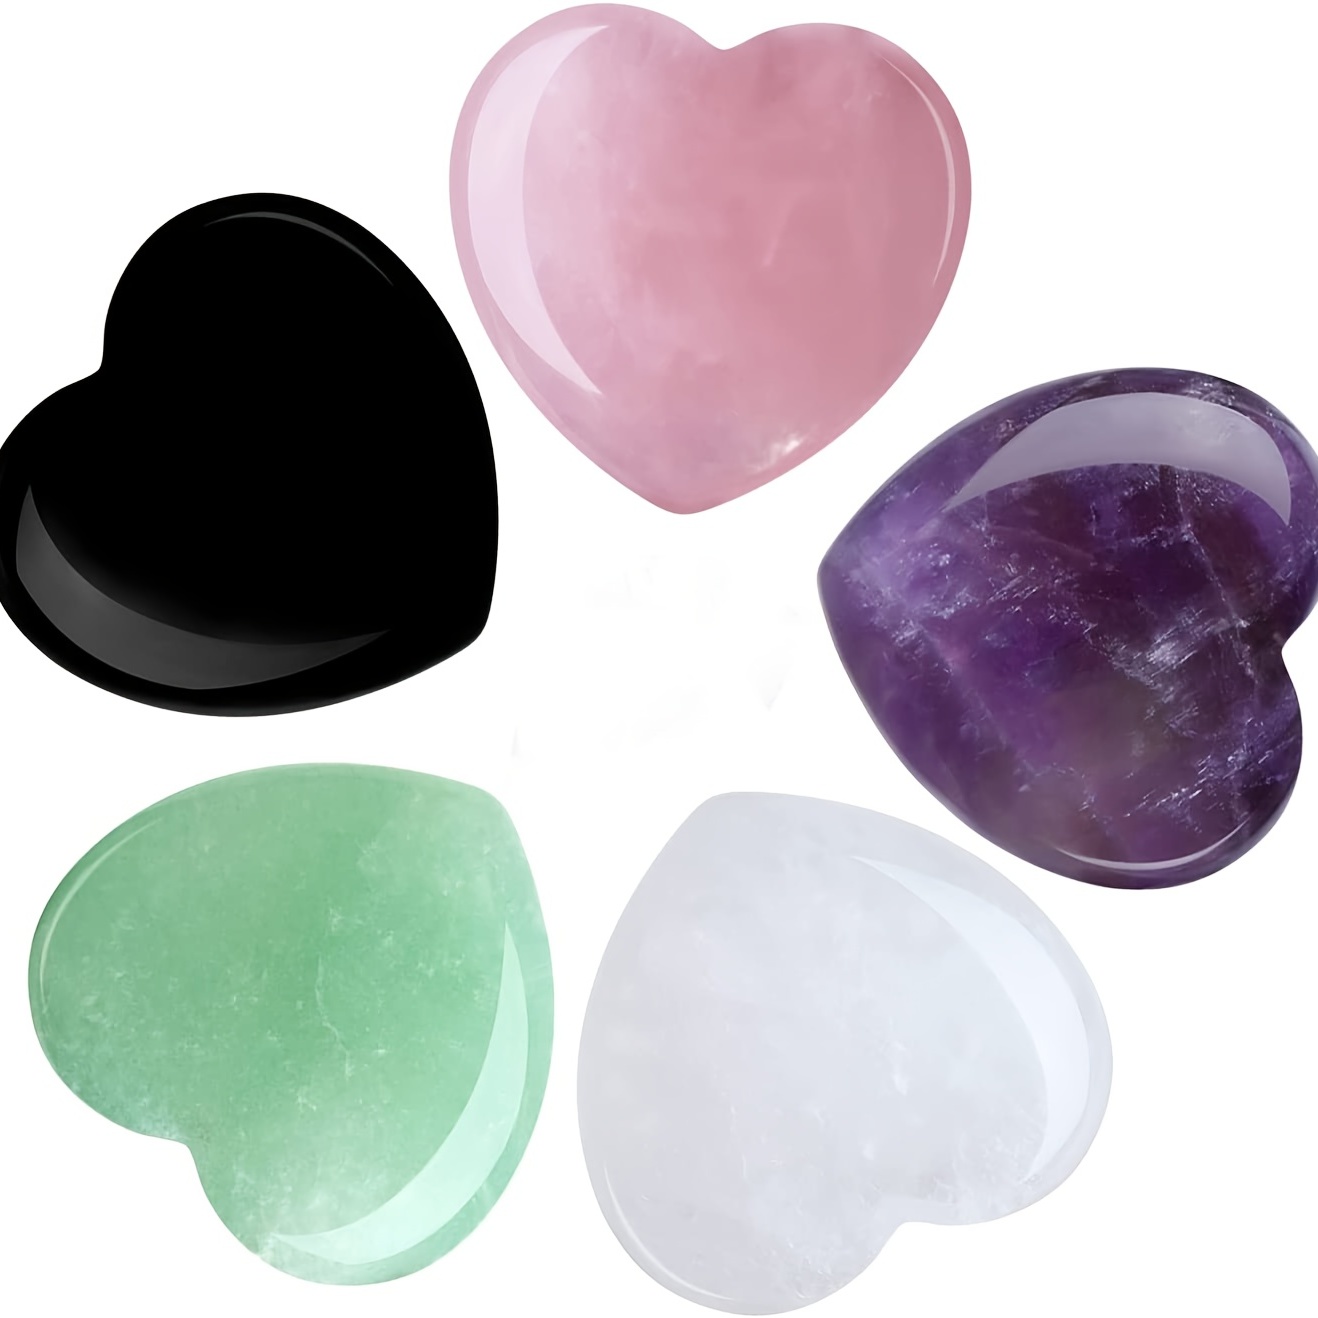  24 Pcs 1 Inch 25mm Natural Heart Shaped Stones Crystals and  Gemstones Worry Stones Bulk Love Crystals Set Heart Shaped Rocks Heart  Pocket Palm Stone for Stress Reiki Balancing Home Decoration